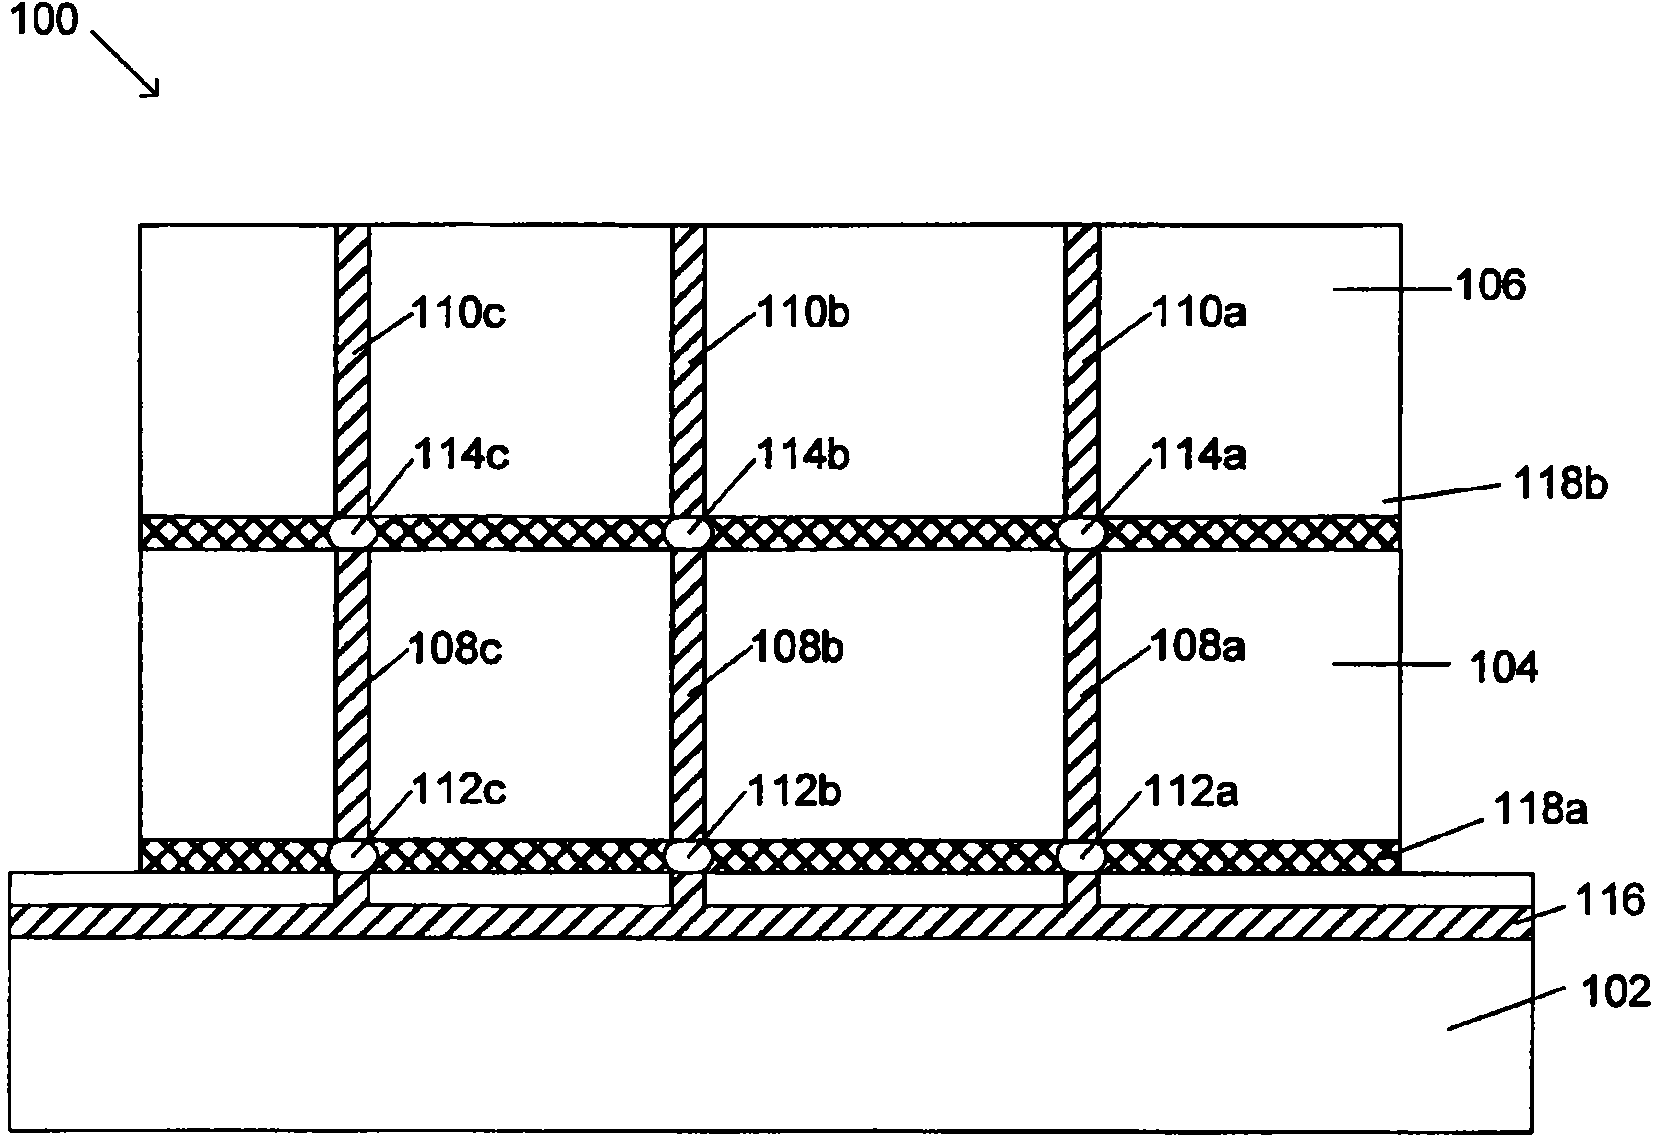 Process for electrodeposition of copper chip to chip, chip to wafer and wafer to wafer interconnects in through-silicon vias (TSV)